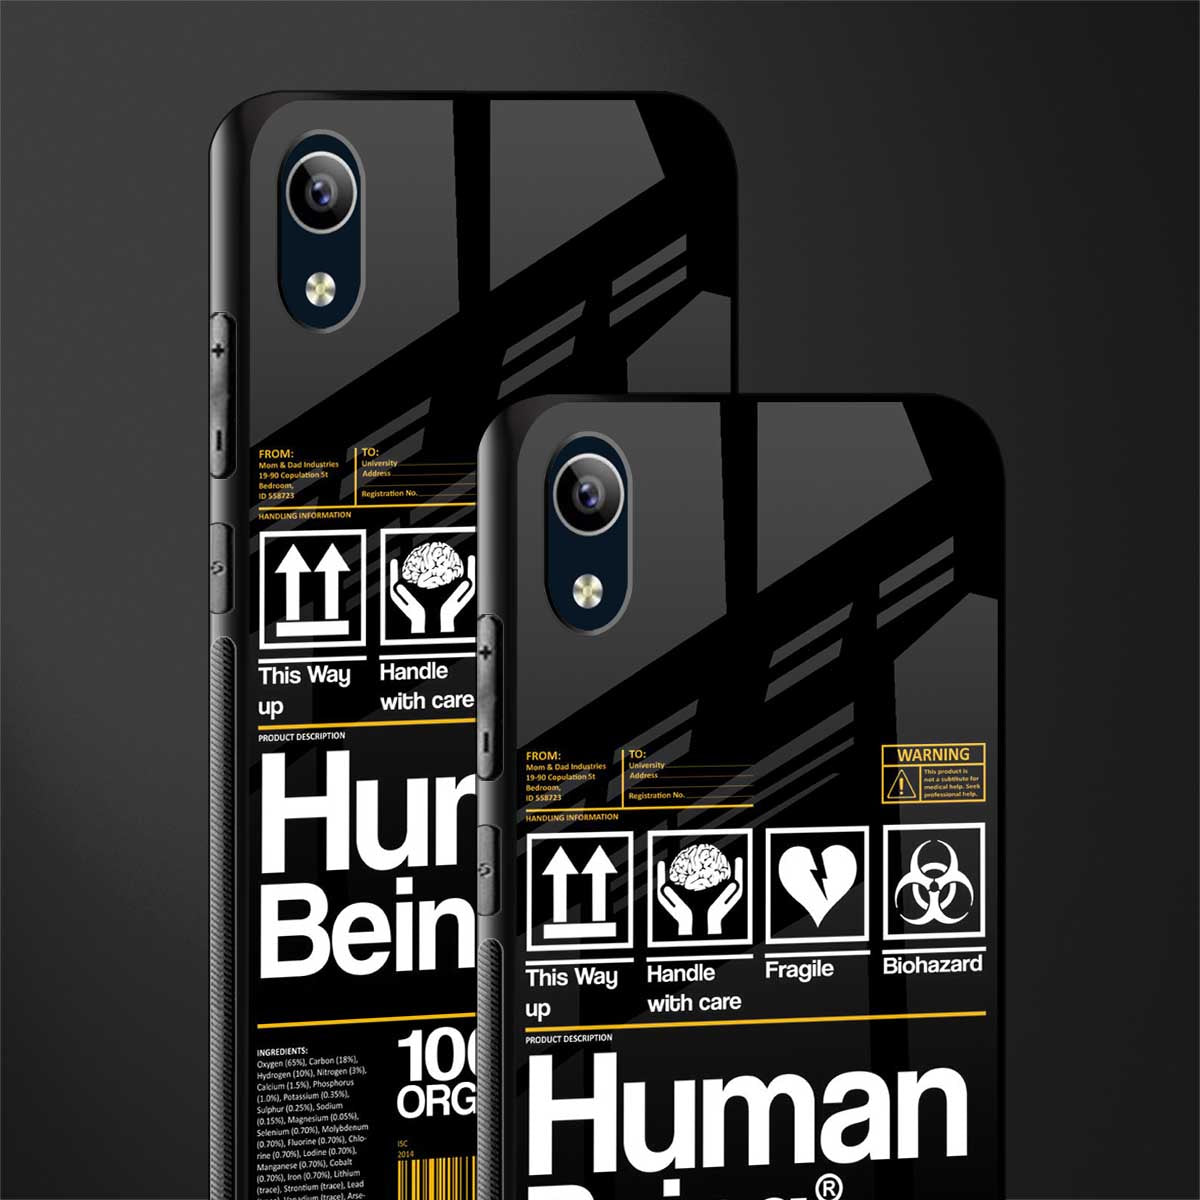 human being label phone cover for vivo y91i